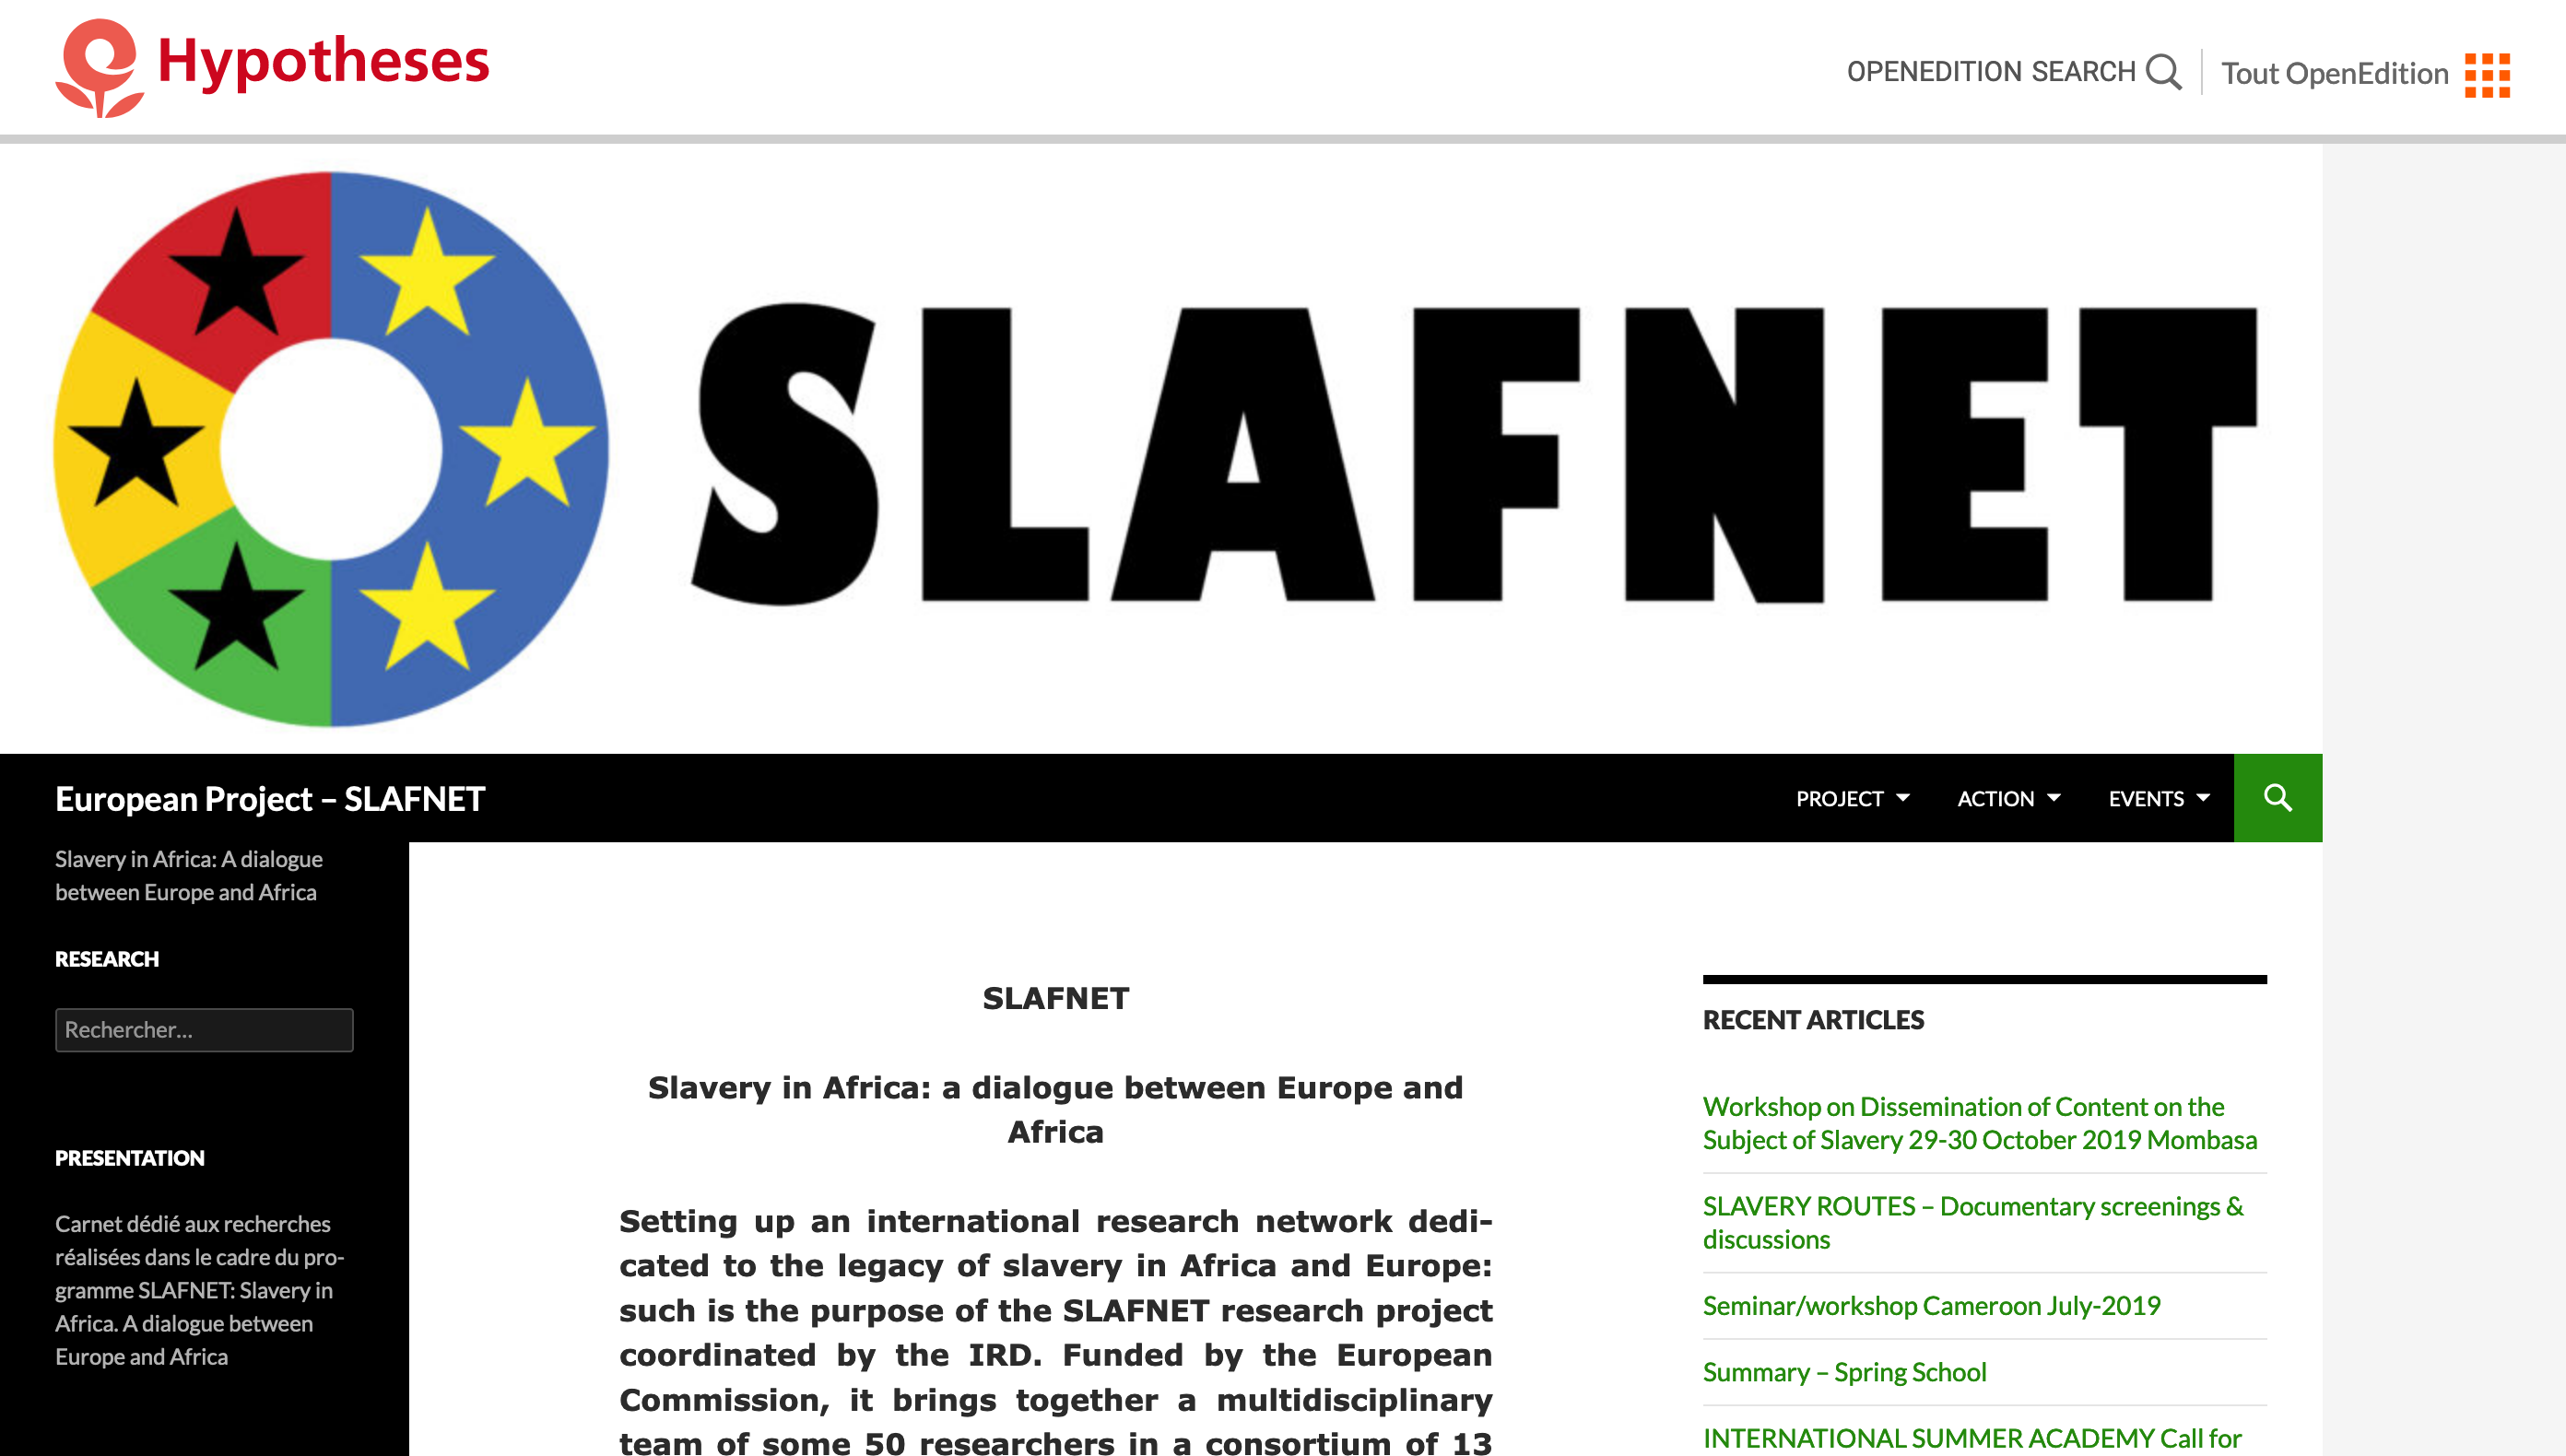 Slafnet. Slavery in Africa: a dialogue between Europe and Africa